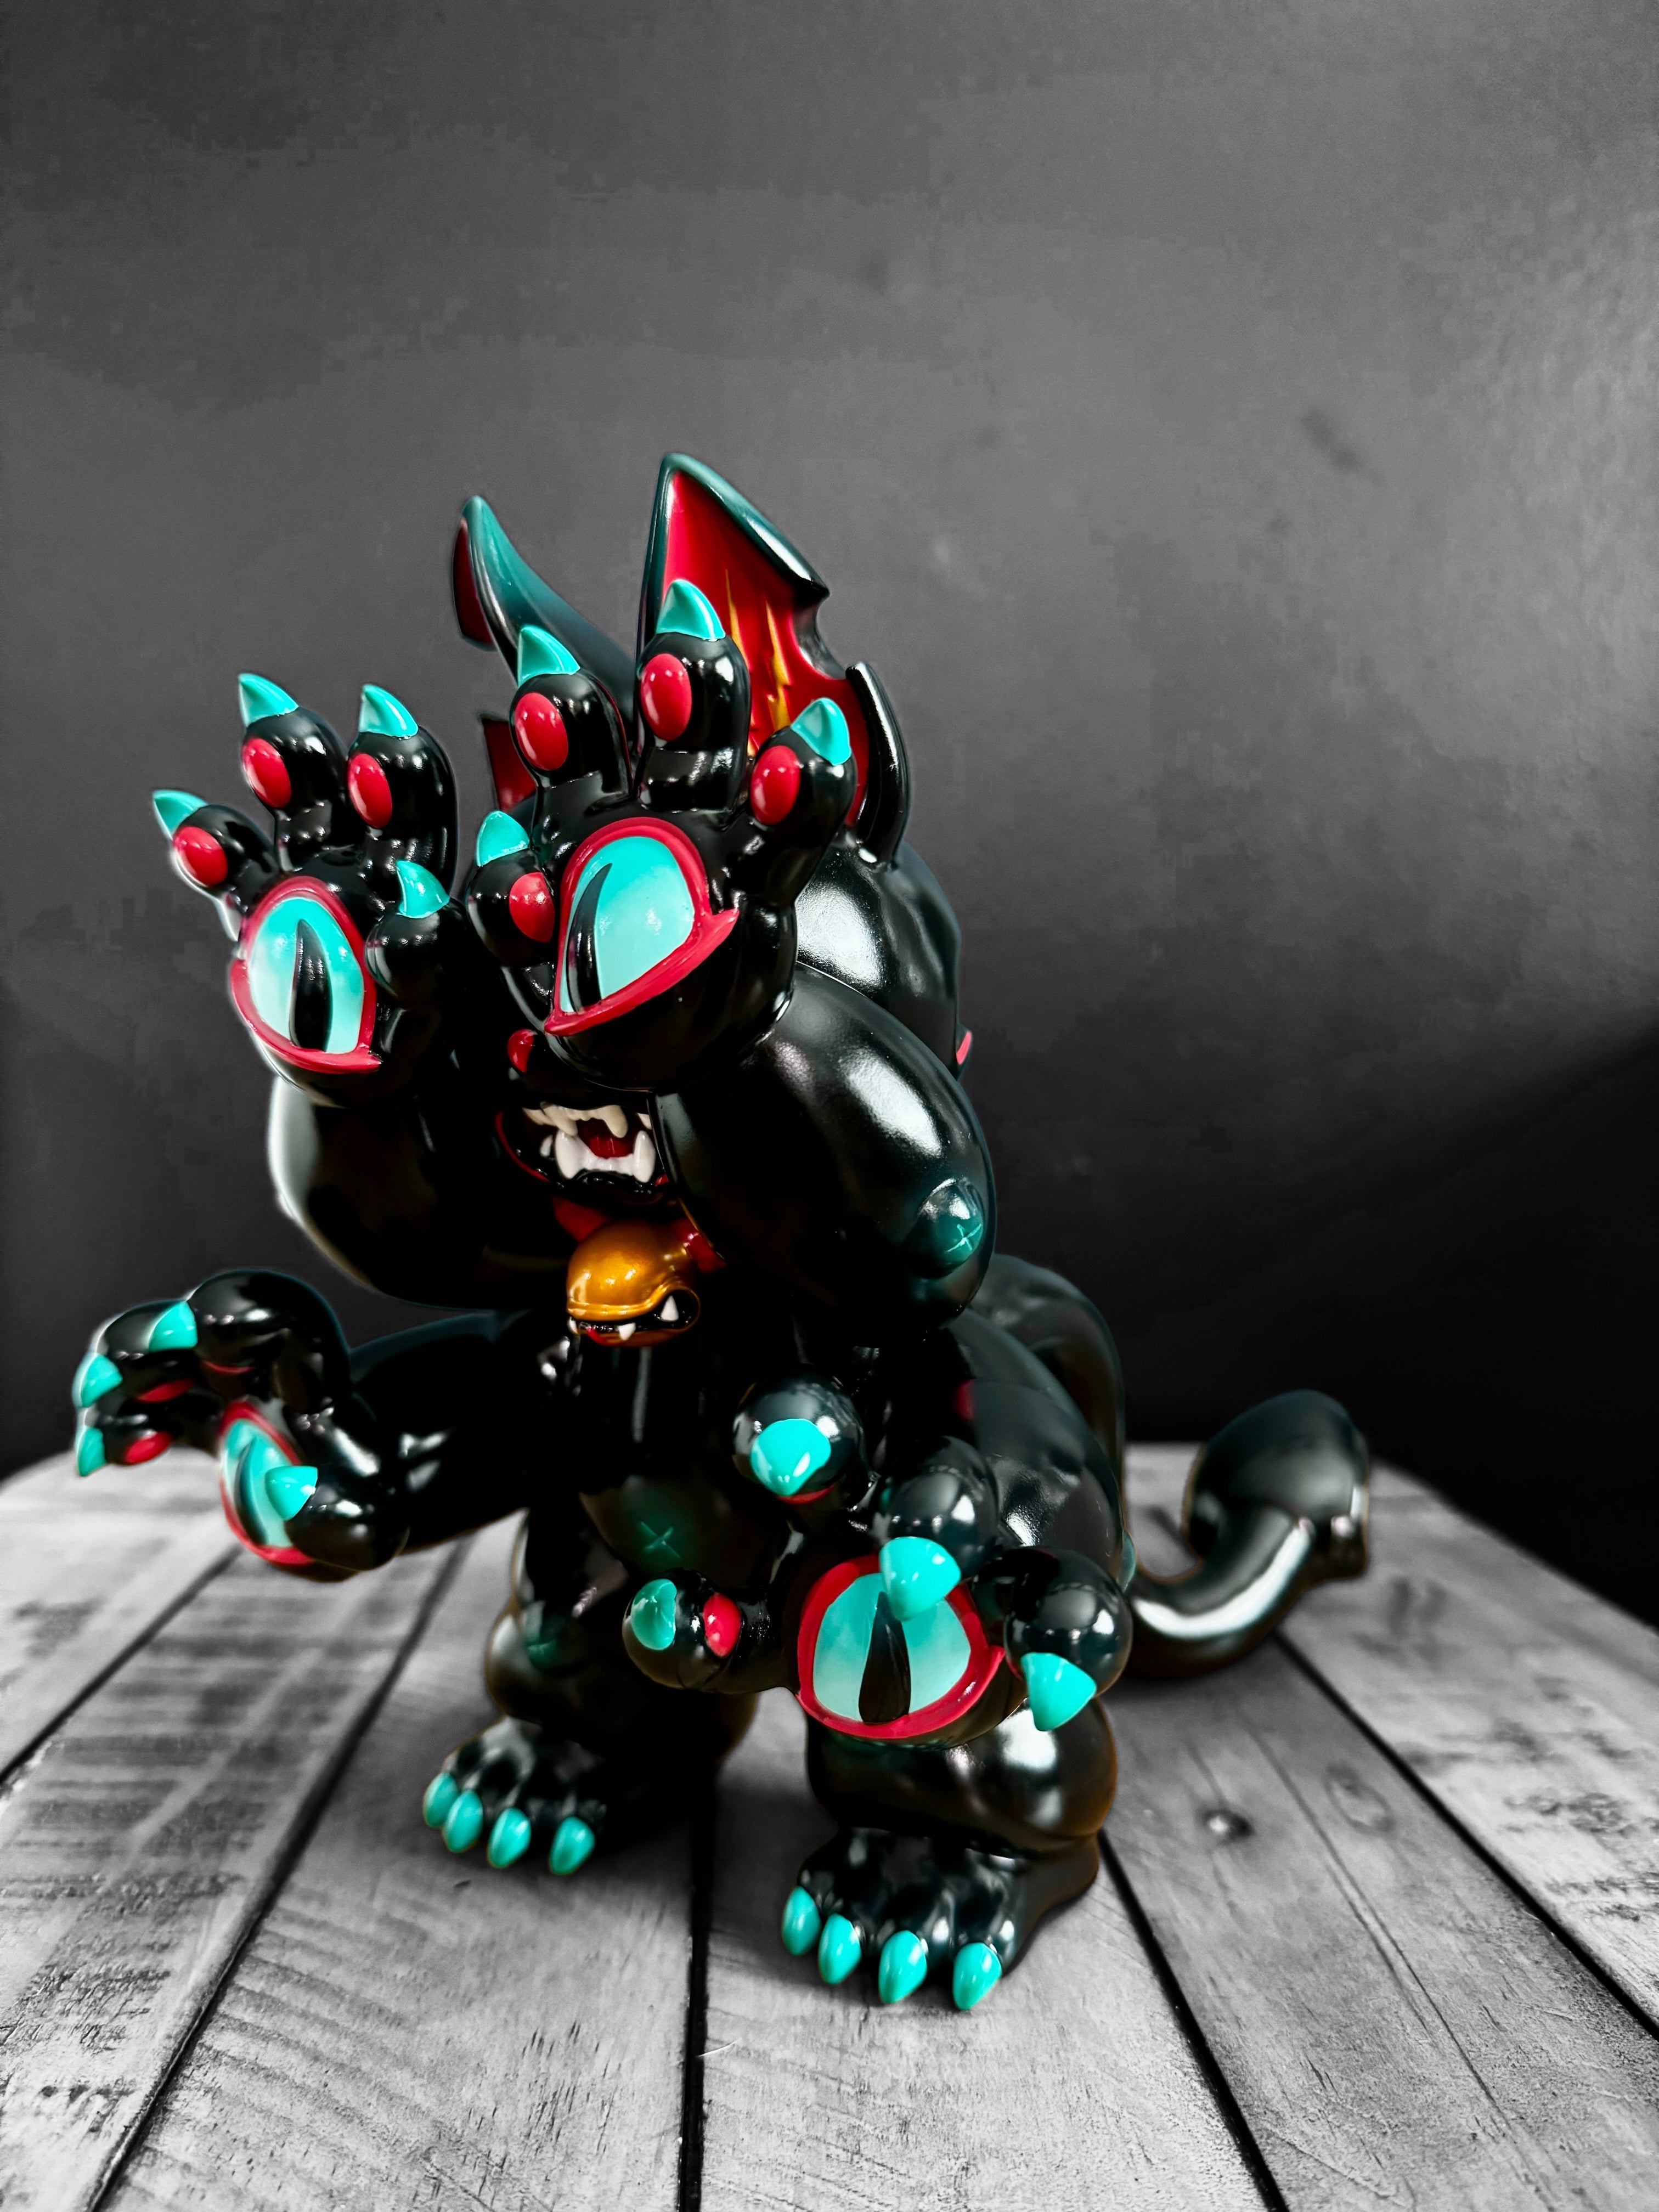 A blind box exclusive: DAINIGIRUJIN Black Ver. vinyl toy by Grape Brain. 8 inches tall, 9.5 inches long. Limited to 100pcs. Close-ups of blue eyes and detailed features.